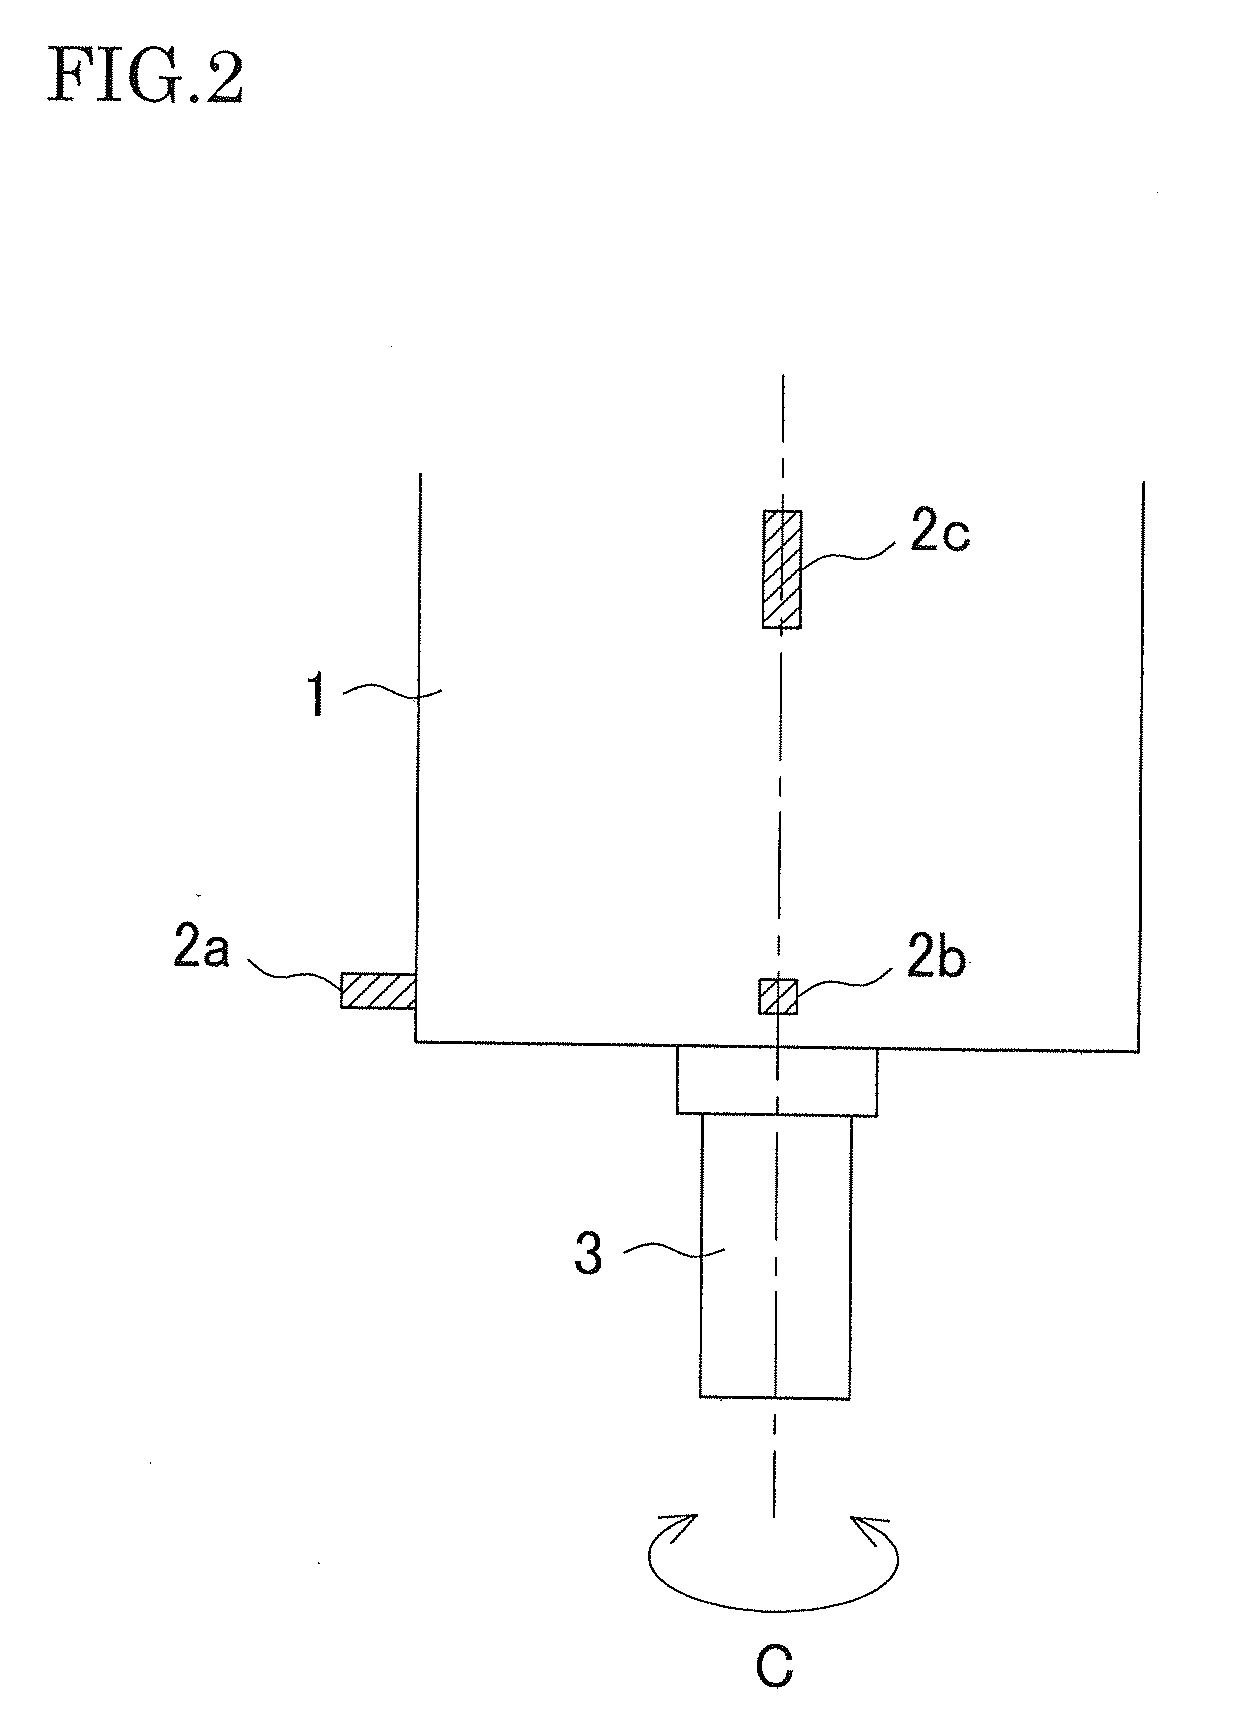 Vibration suppressing method and vibration suppressing device for machine tool